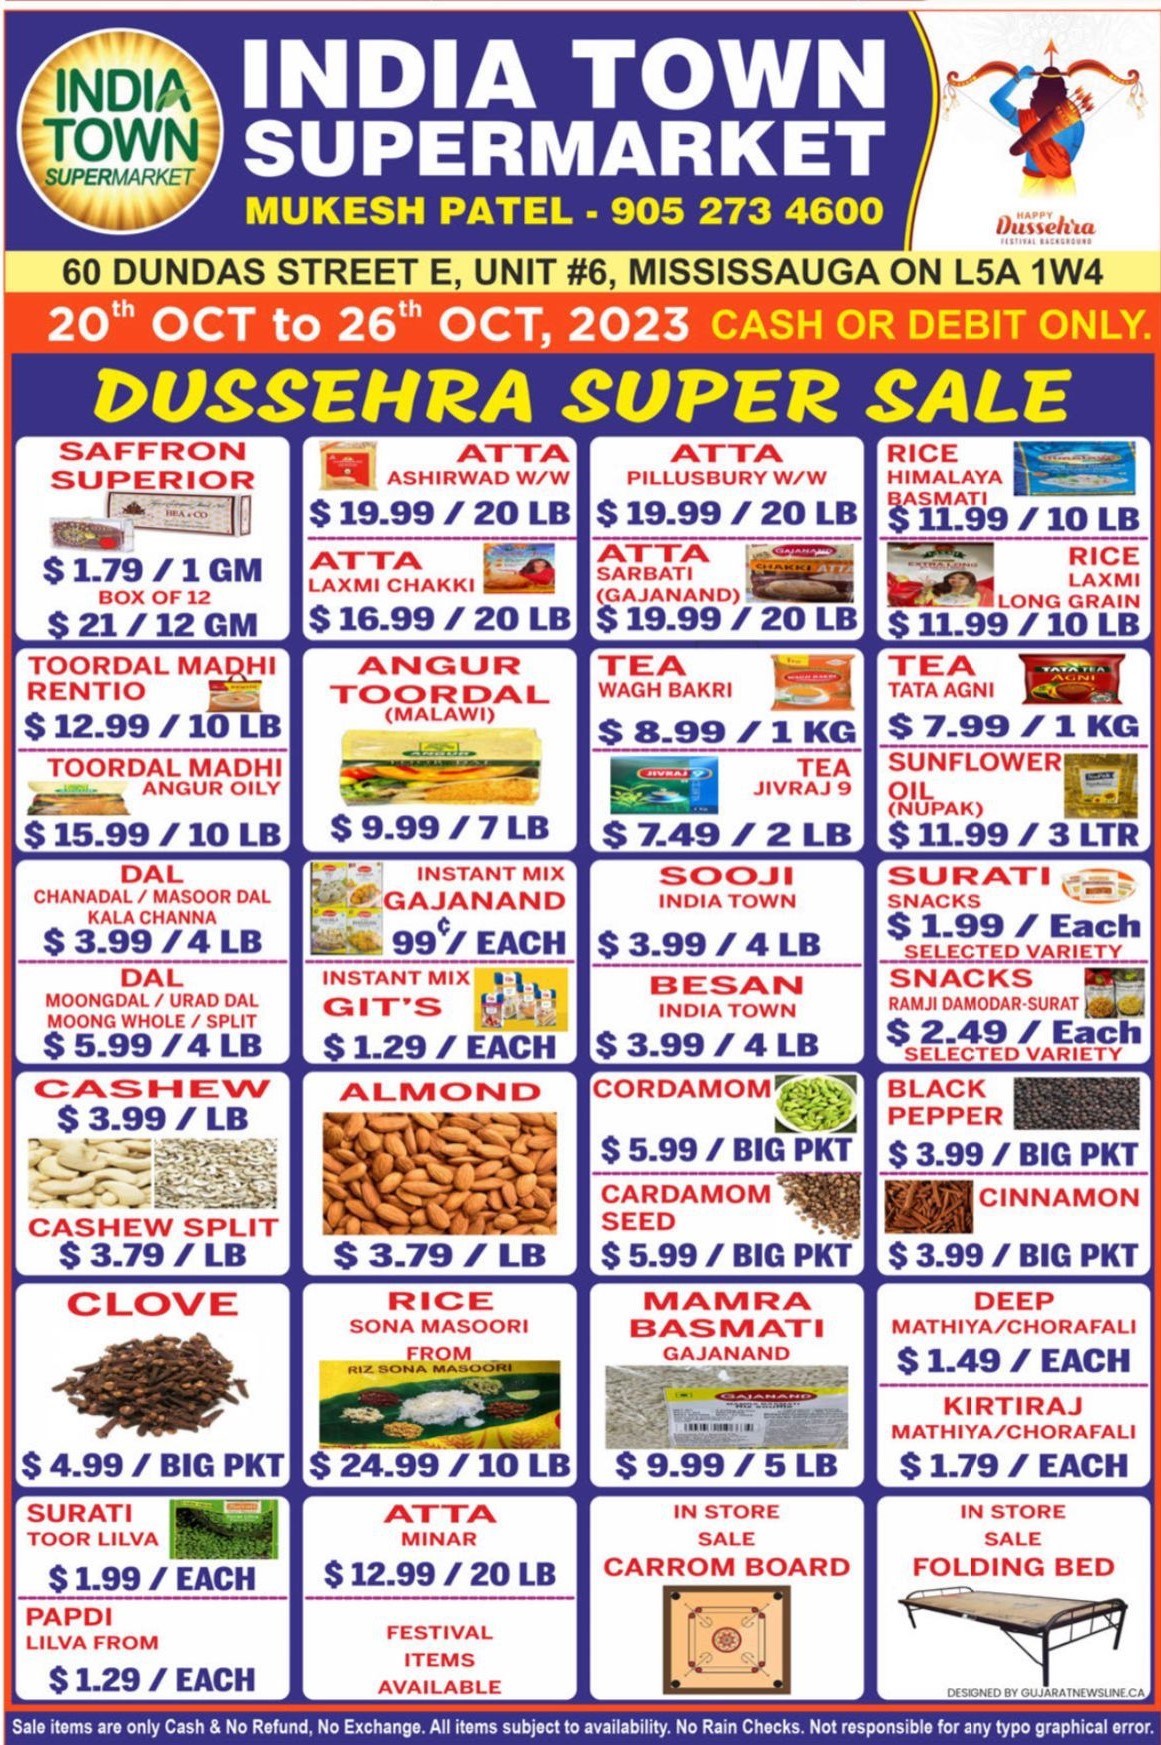 India Town Mississauga - Dussehra Super Sale - Octo 20 to Oct 26 2023